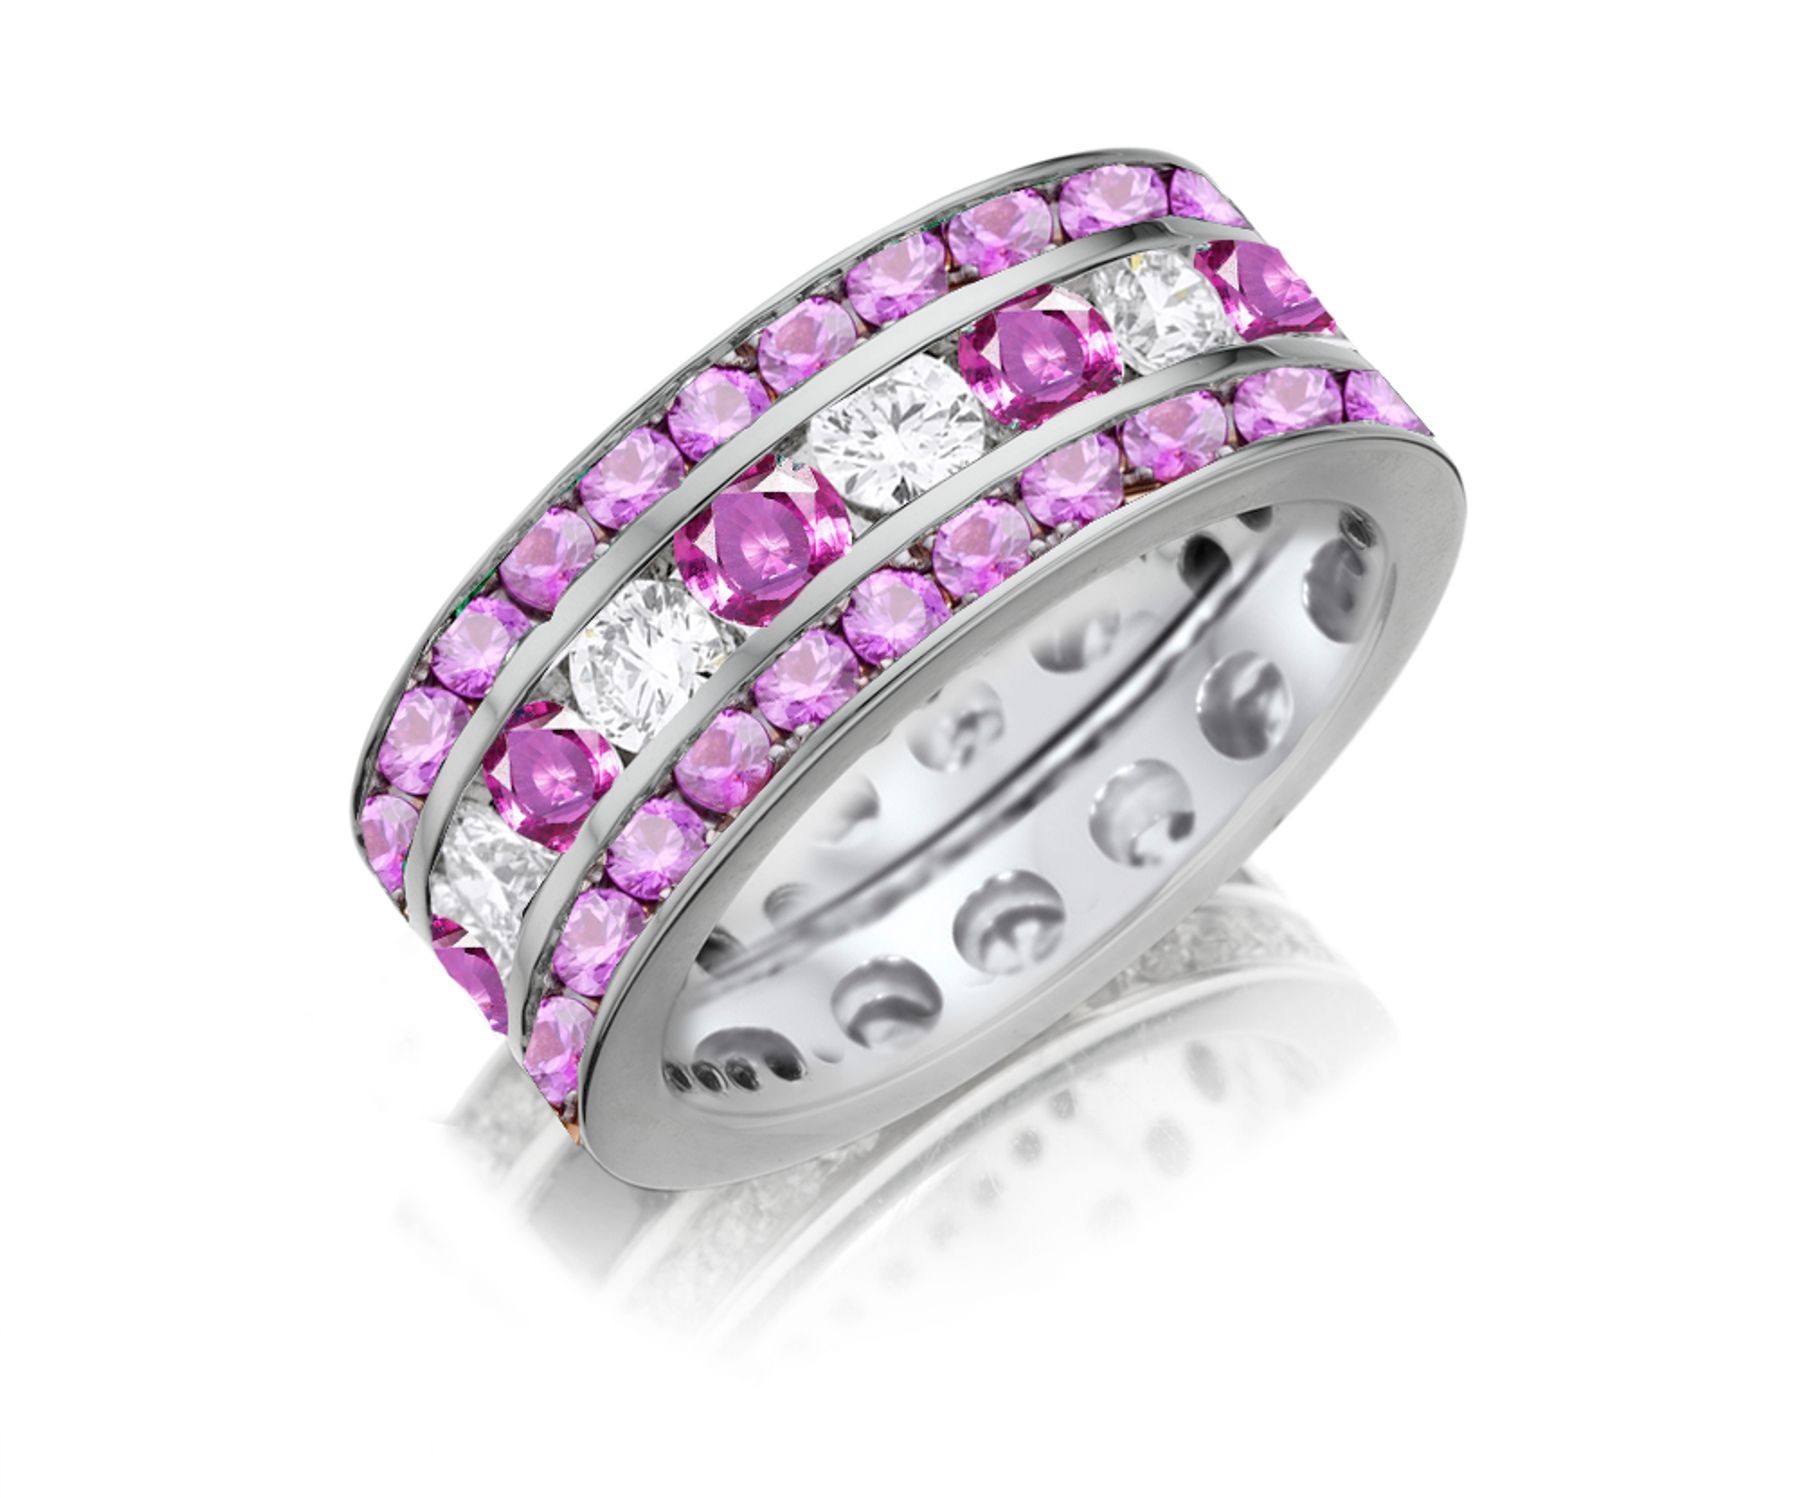 Lifetime of Love Eternity Band Ring With Round Cut Pink Sapphires & Diamonds